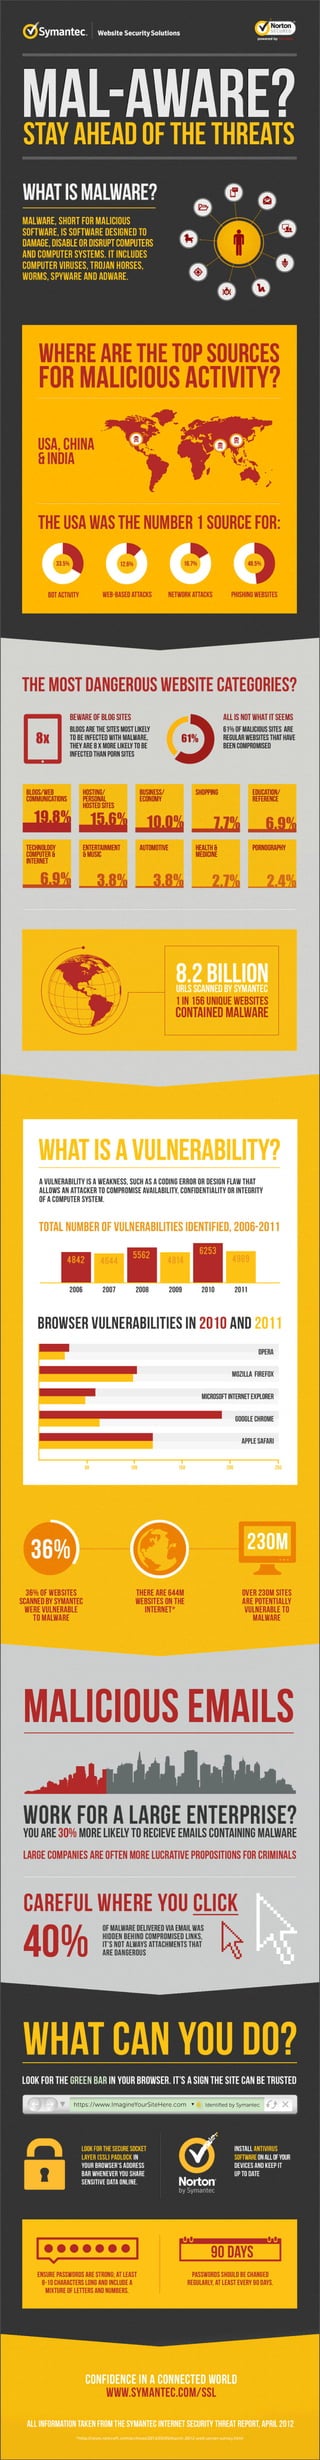 What is Malware? - Infographic By Symantec